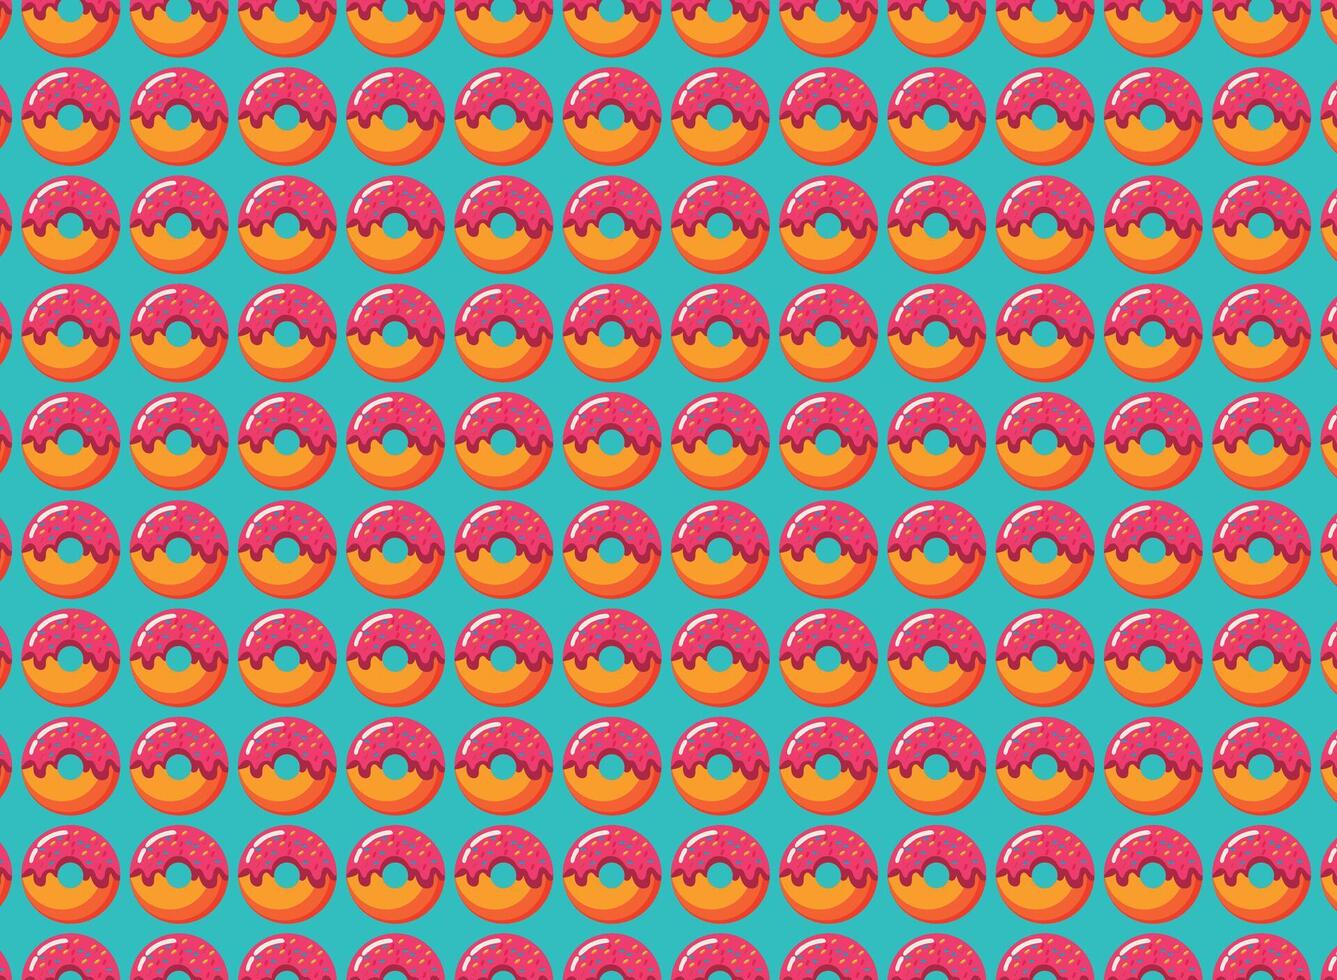 Donuts pattern for backgrounds and textures, vector